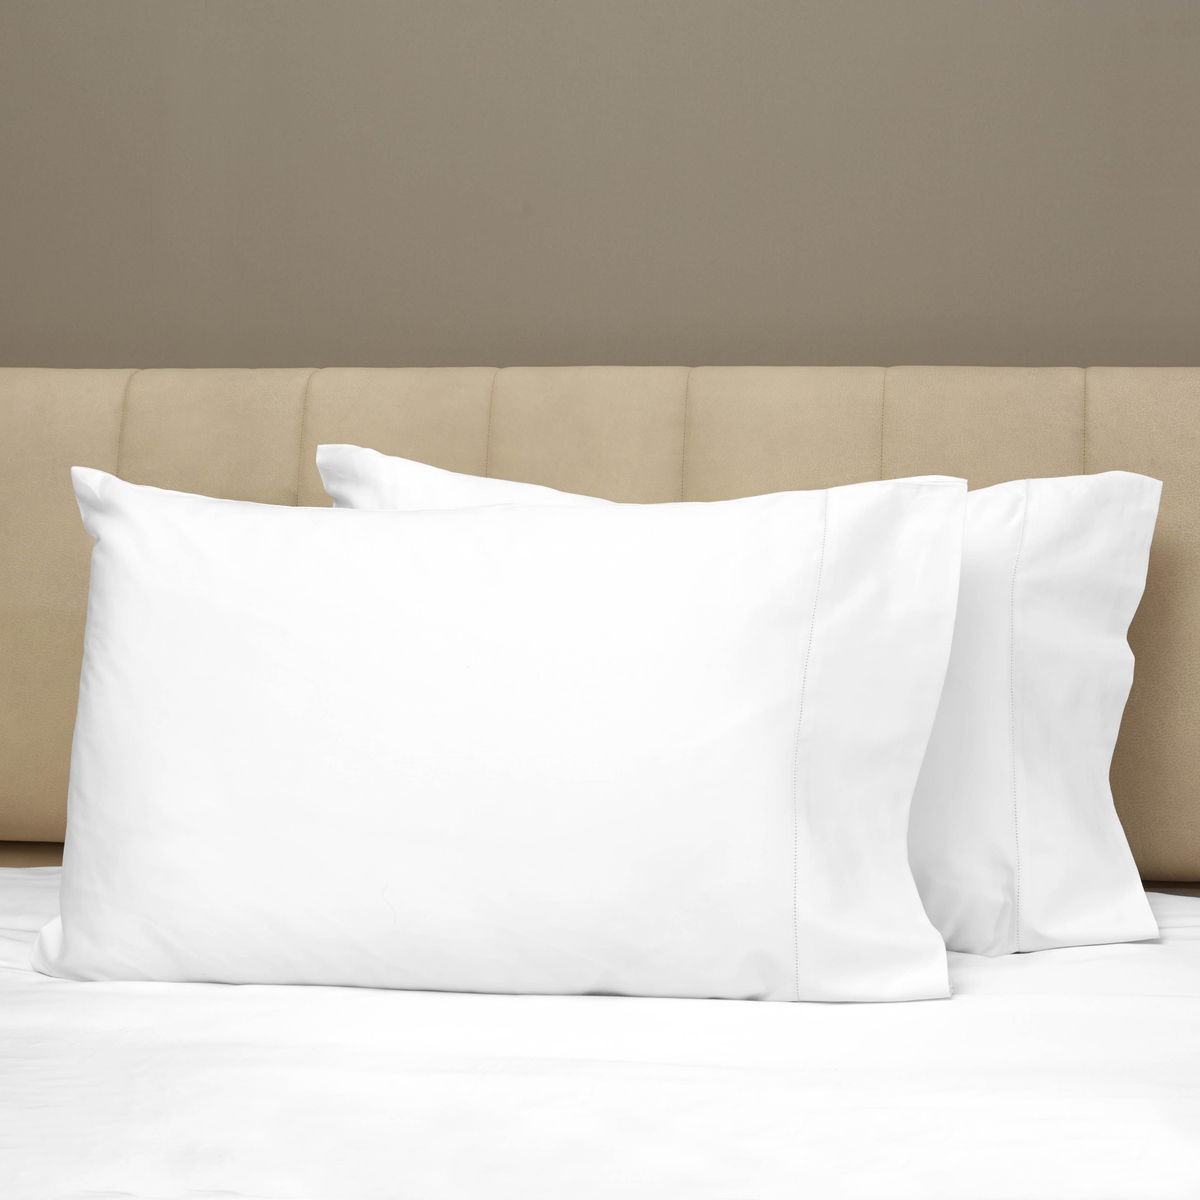  Front View of Signoria Nuvola Bedding Pillowcases in White Color